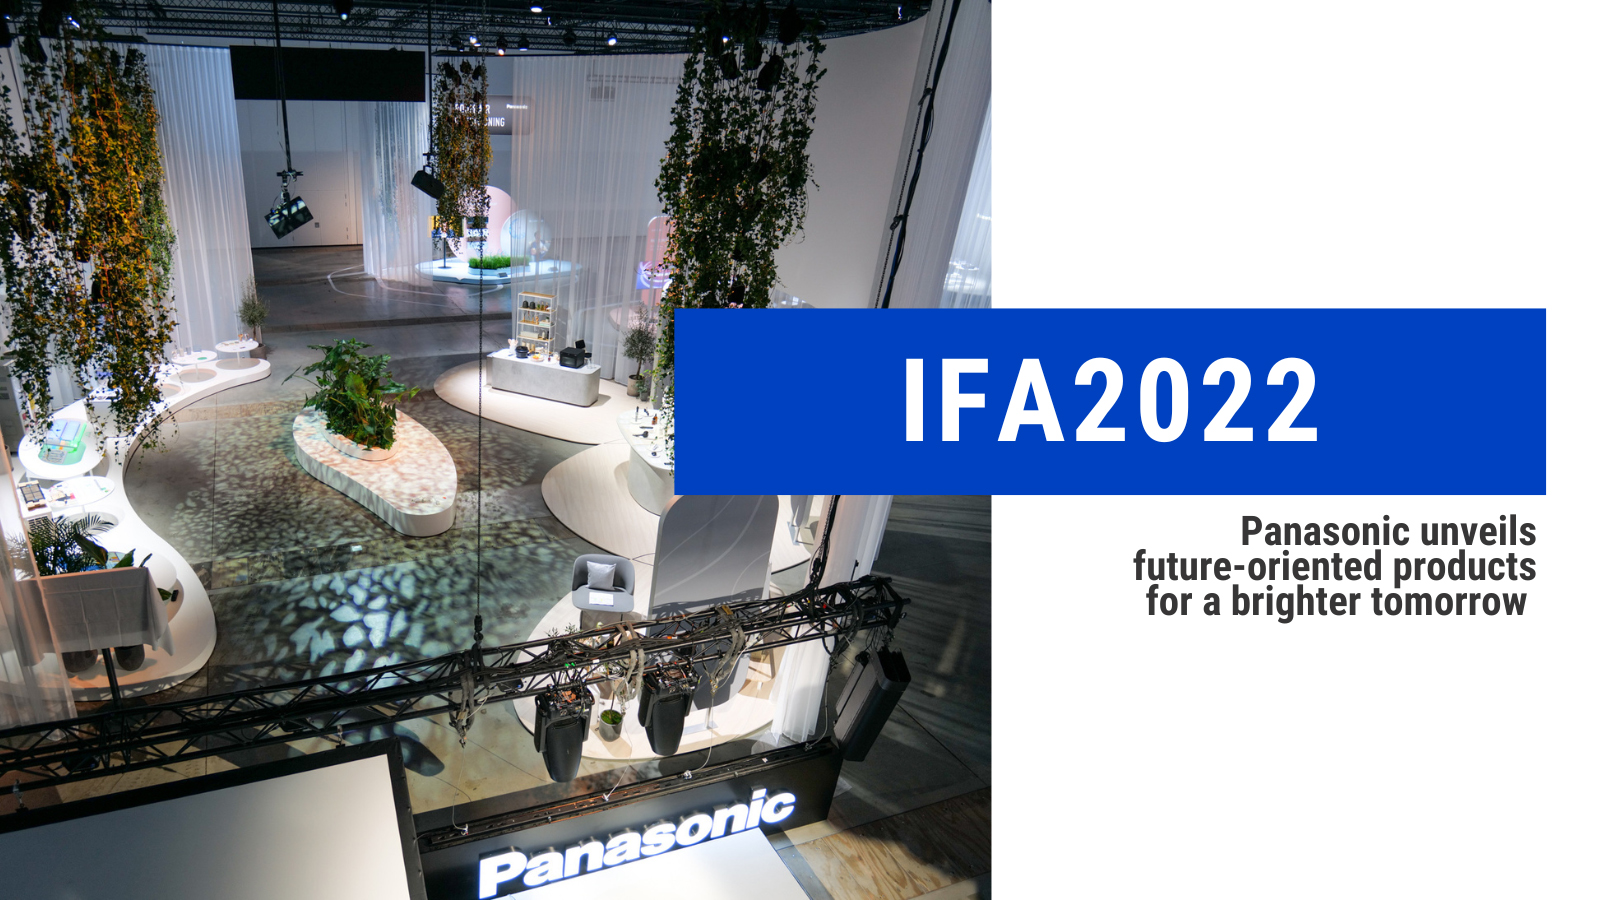 Image: Panasonic Unveils Future-Oriented Products for a Brighter Tomorrow at IFA 2022